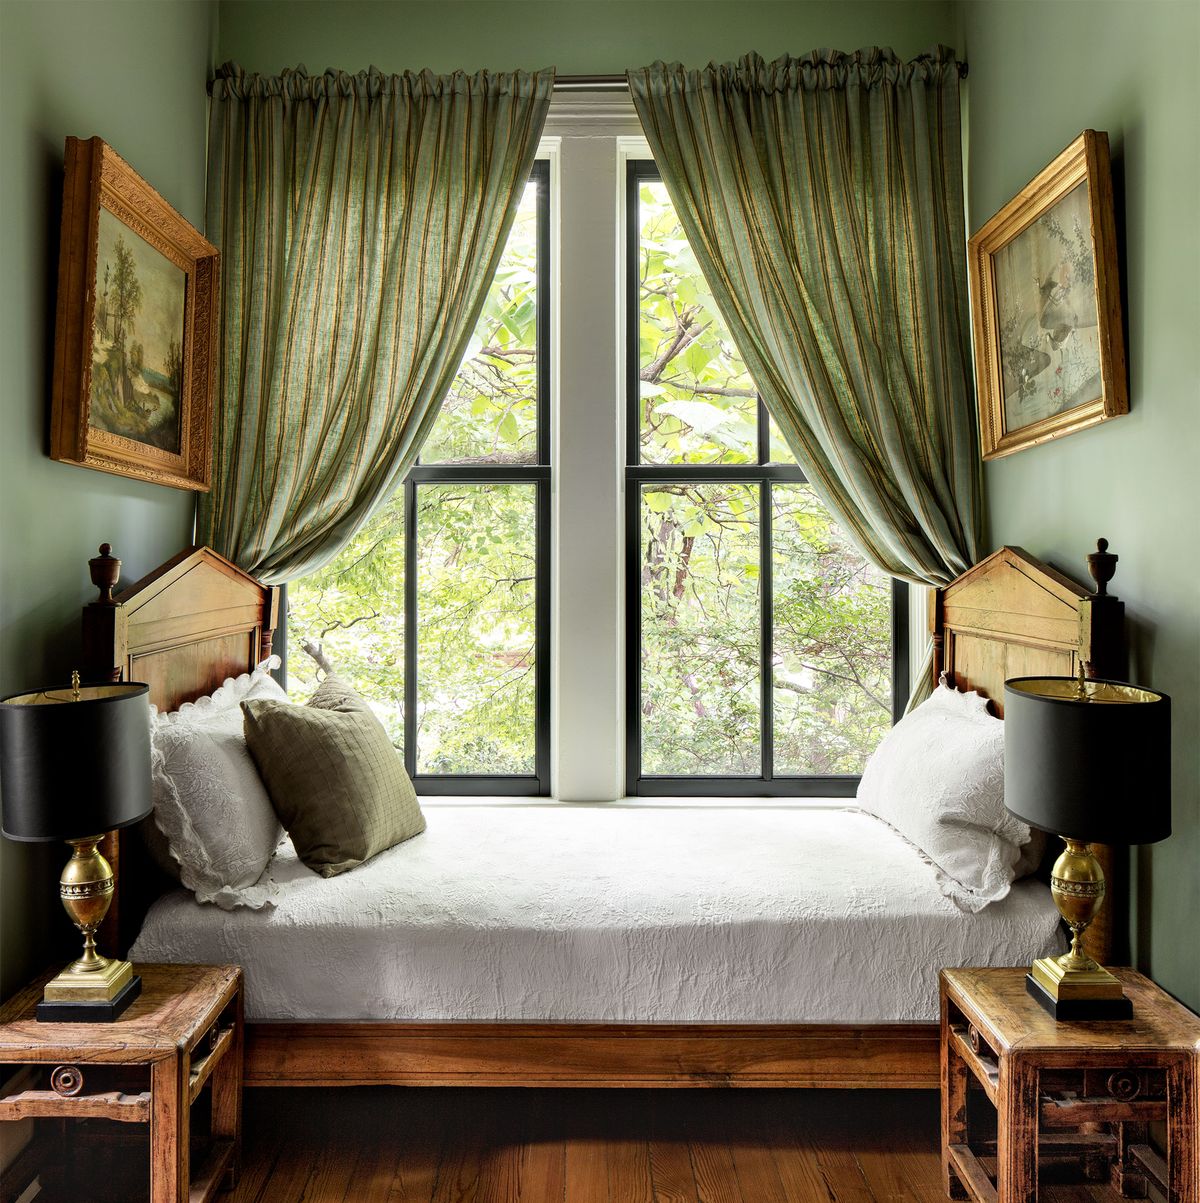 12 Best Sage Green Paint Colors for a Relaxing Room